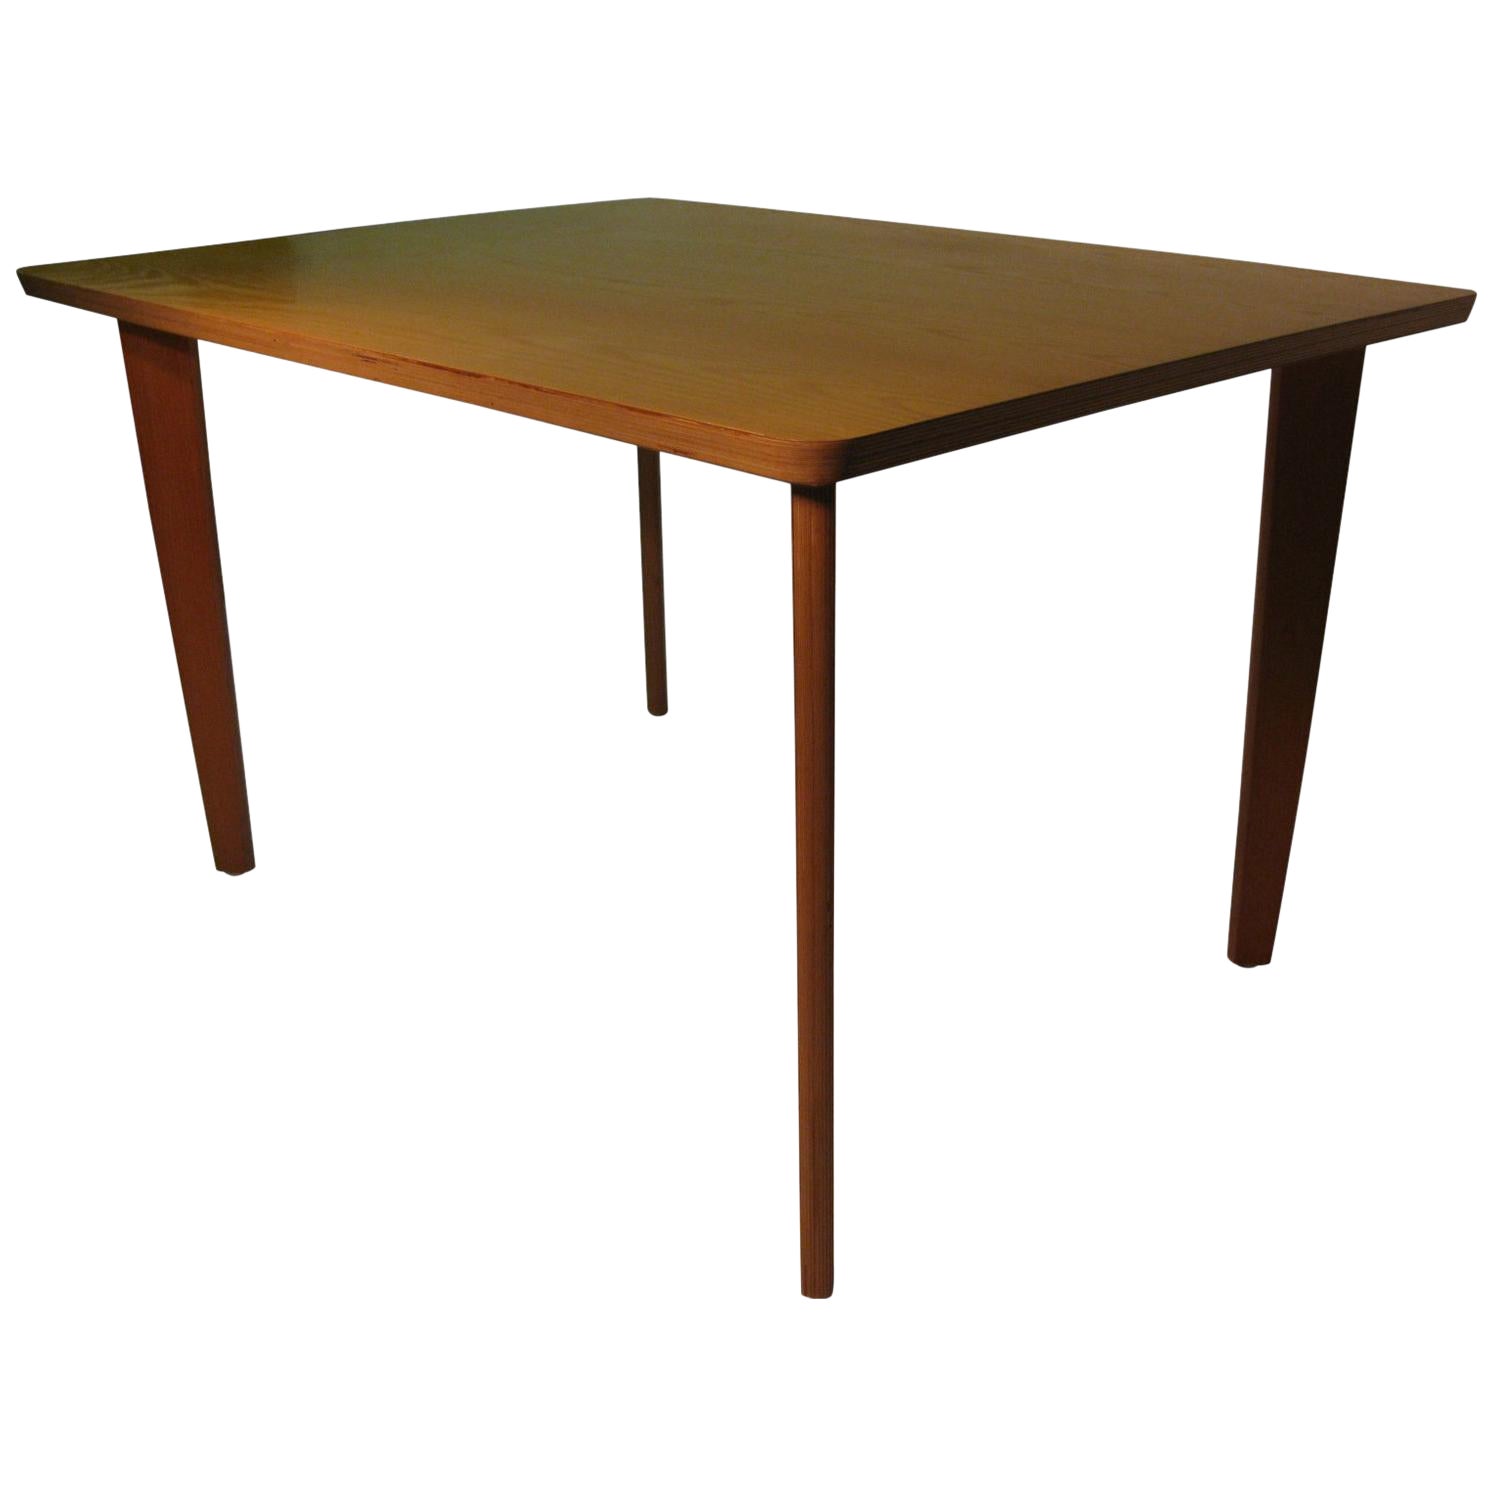 Late 20th Century Modern Custom-Made Oak Table In Good Condition For Sale In Port Jervis, NY